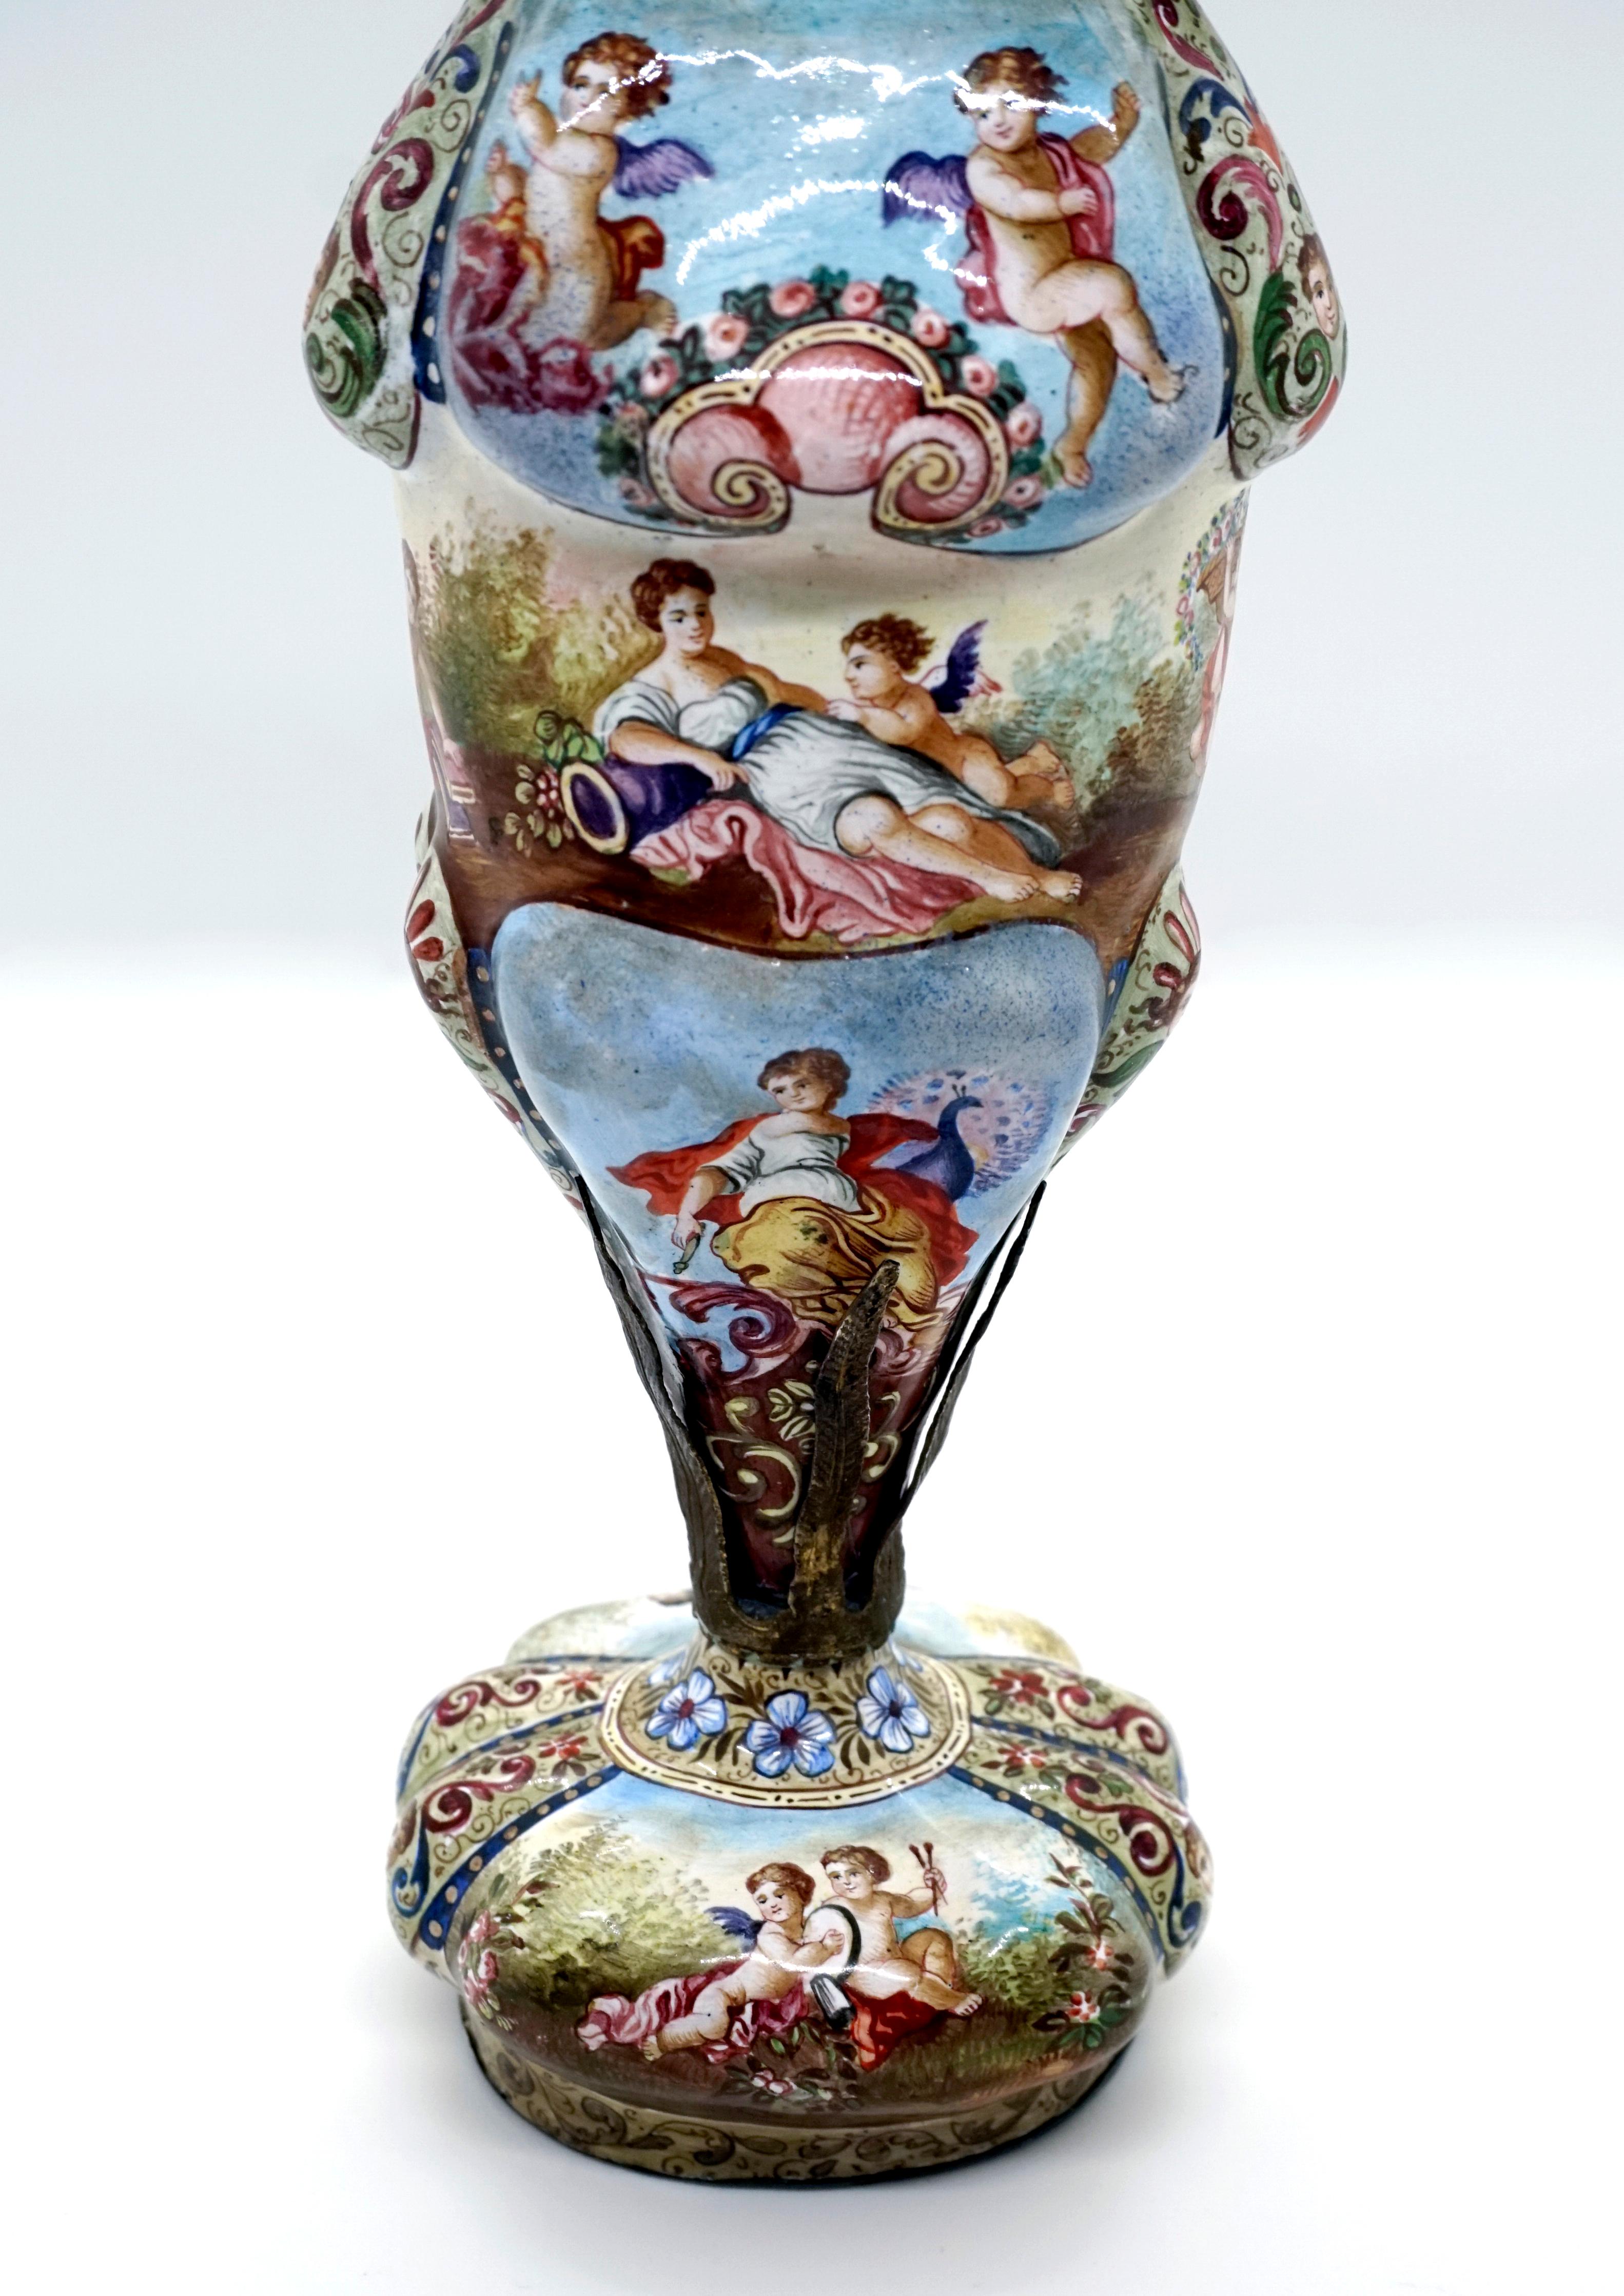 Finest 19th Century Viennese Enamel Amphora with Cupids and Antique Scenes 1